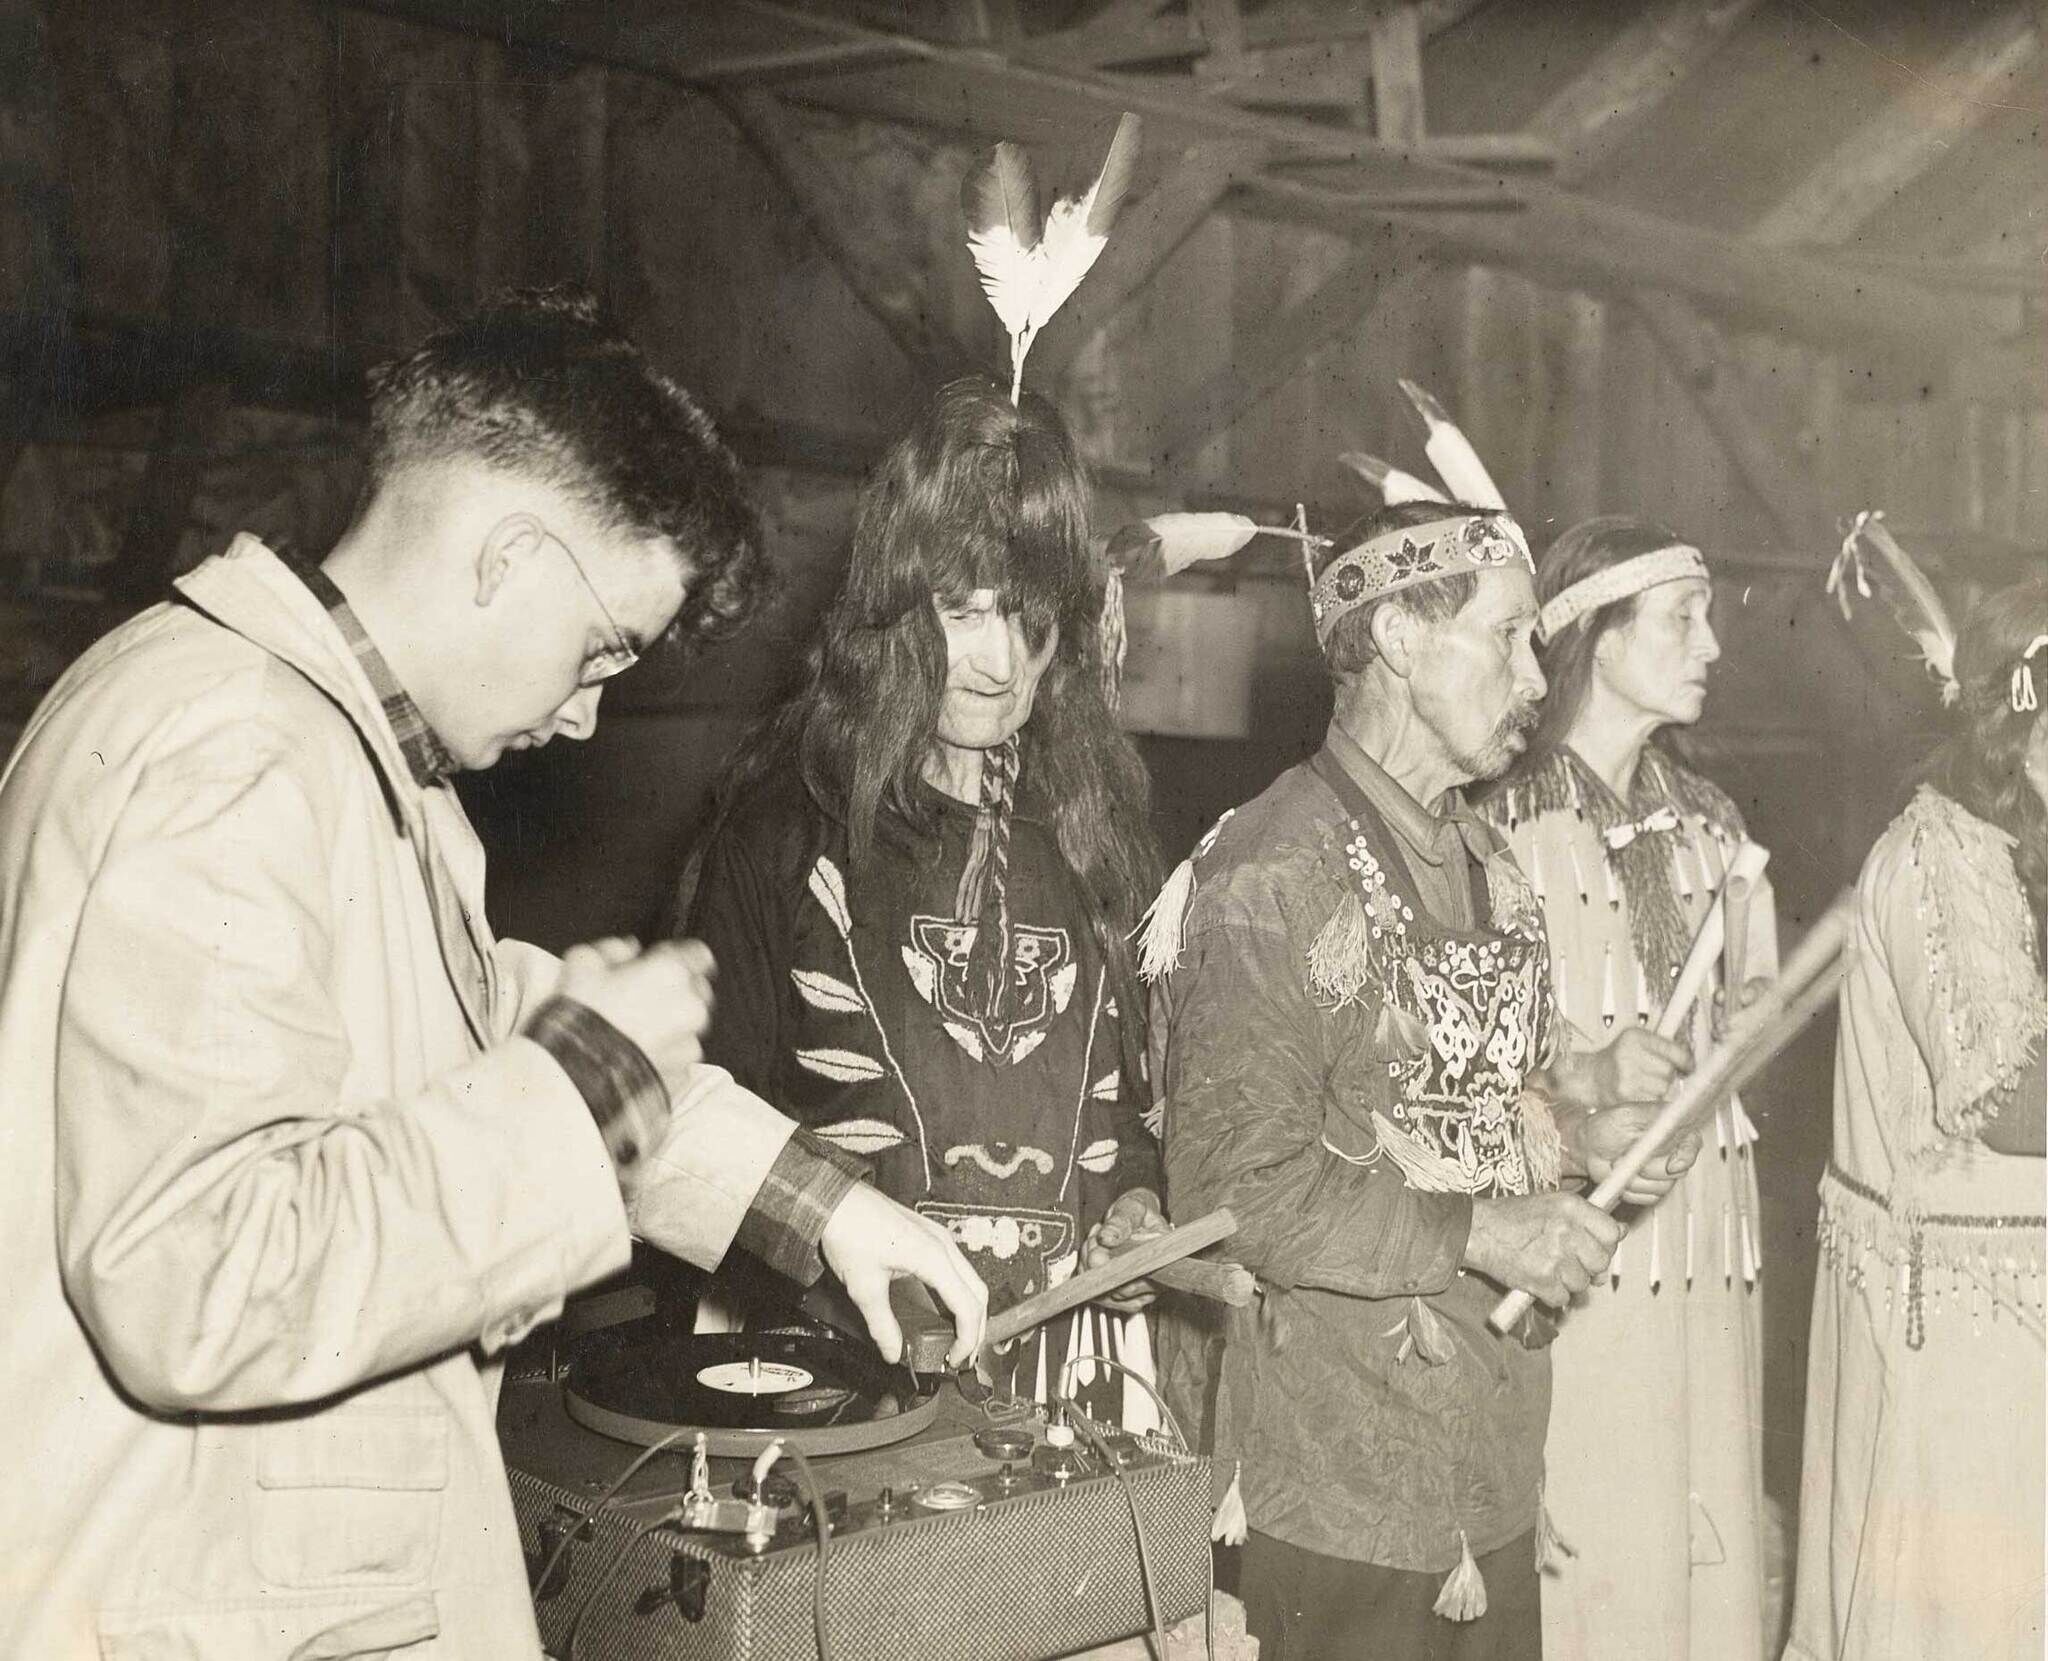 Harry Smith, a young white man with glasses recording four men in traditional Lummi ceremony.